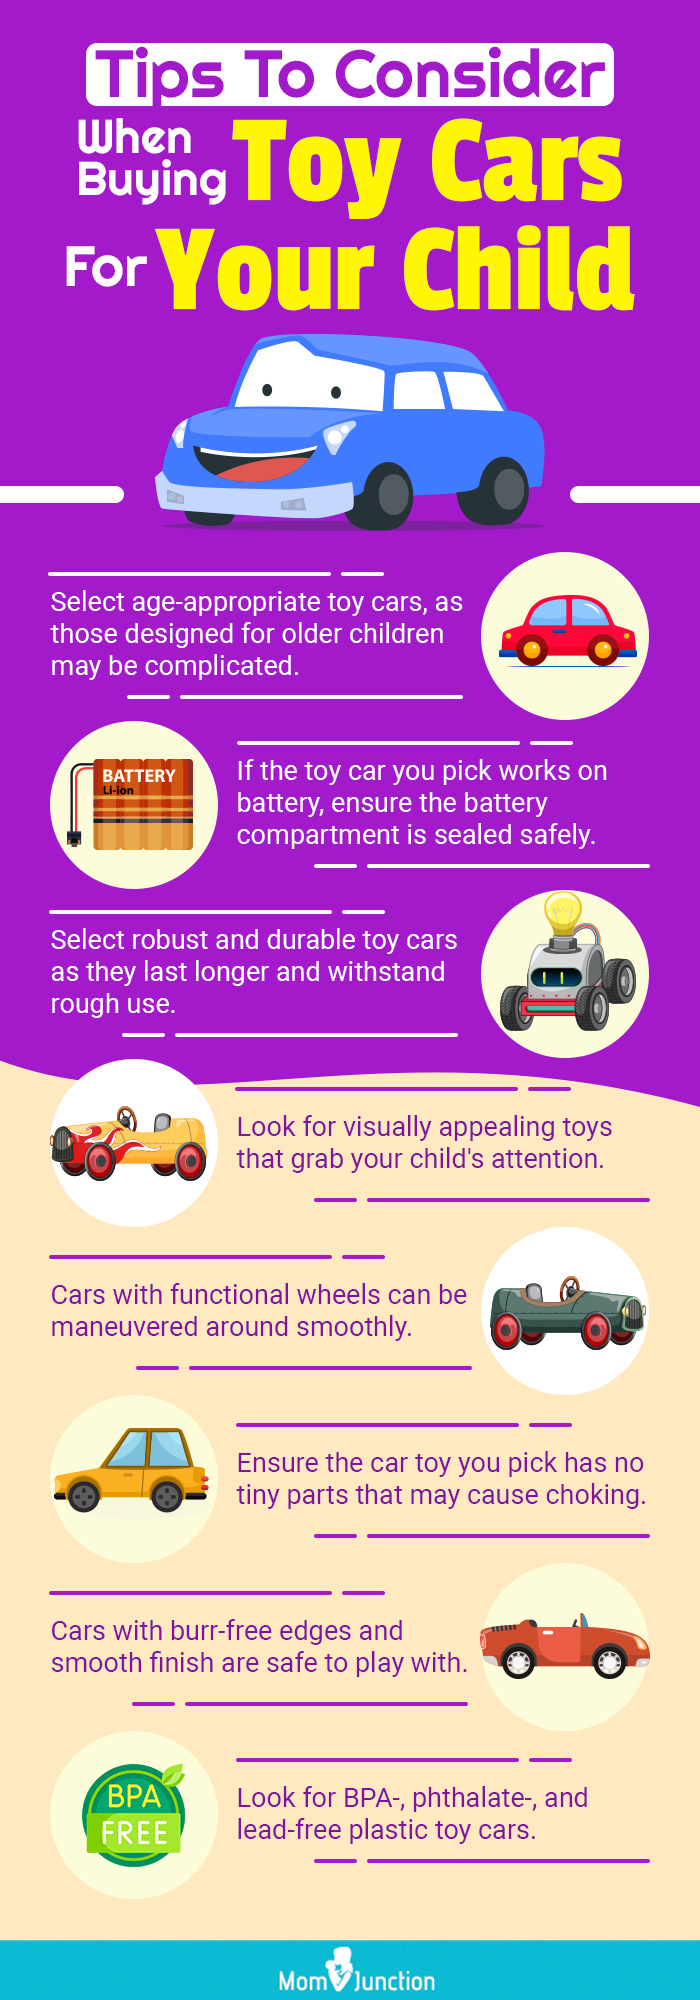 Tips To Consider When Buying Toy Cars For Your Child